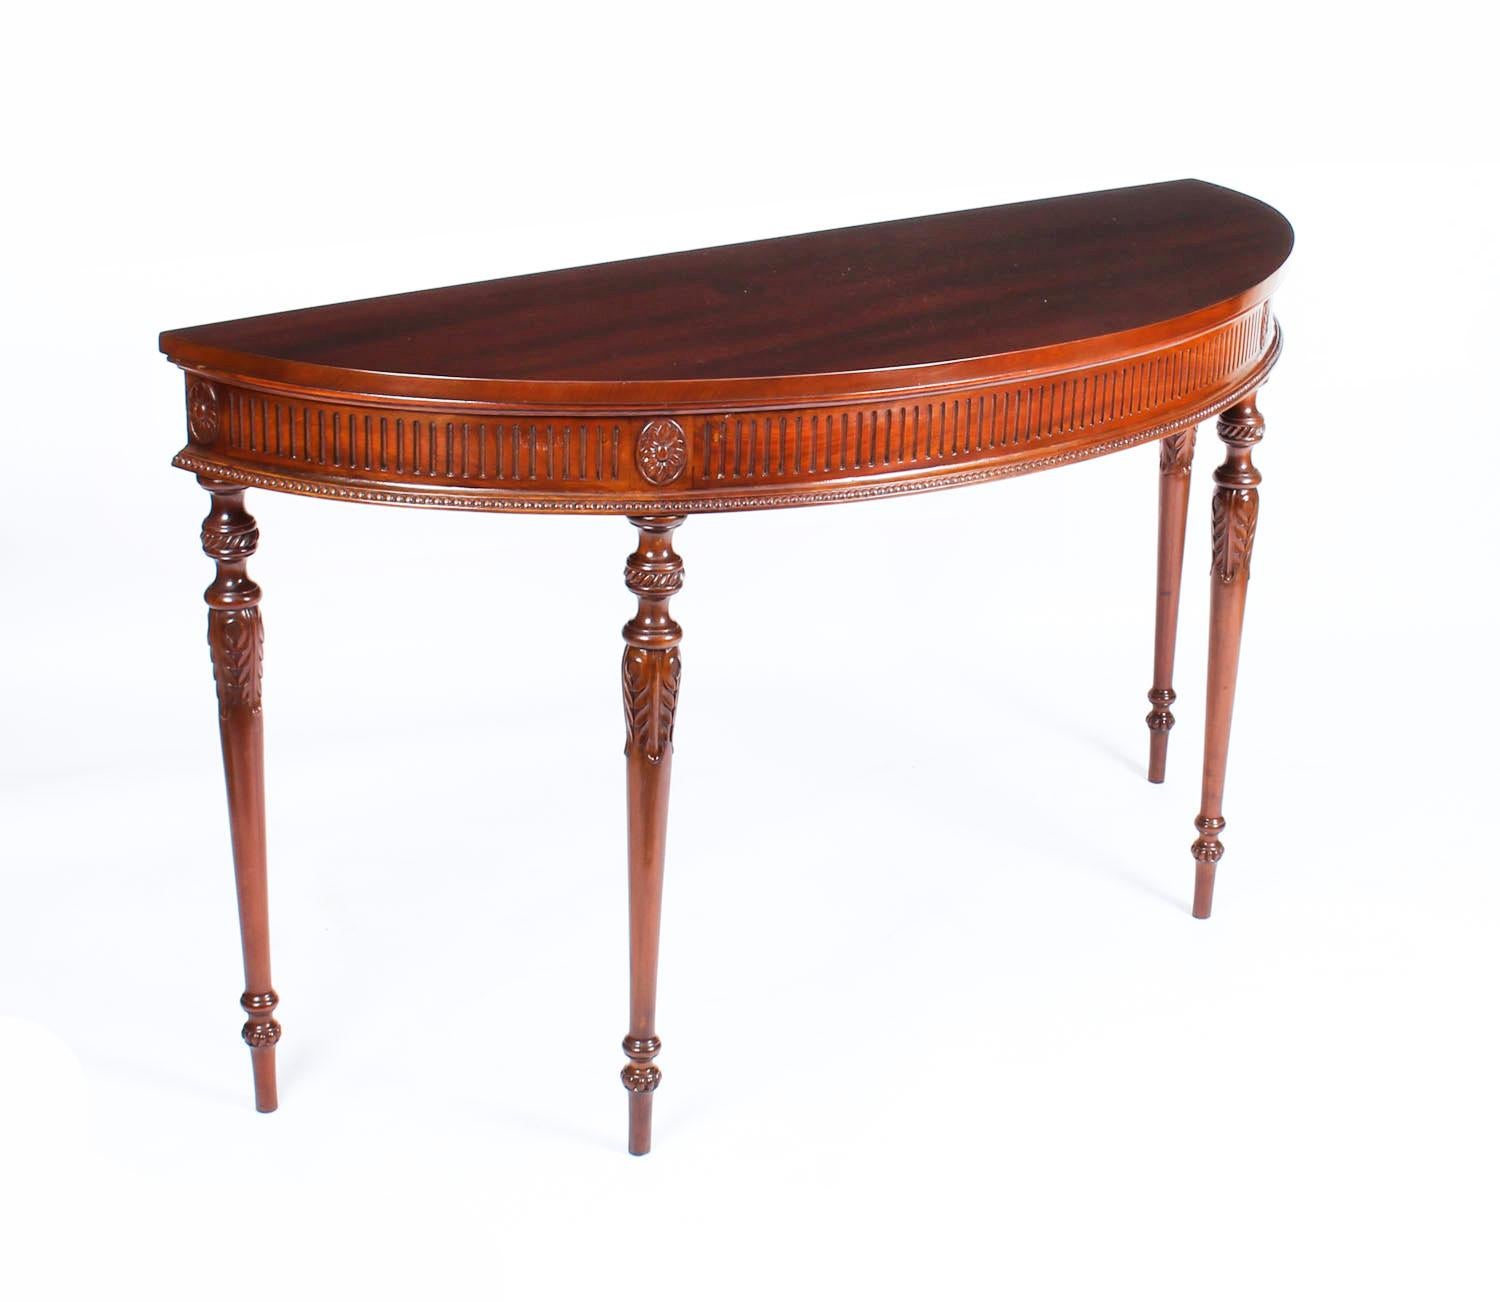 This is a lovely antique pair of English Edwardian mahogany demilune console tables in, dating from circa 1900.

The half-round console table tops feature shallow profiles, the fluted friezes beautifully marked with flower heads above bead